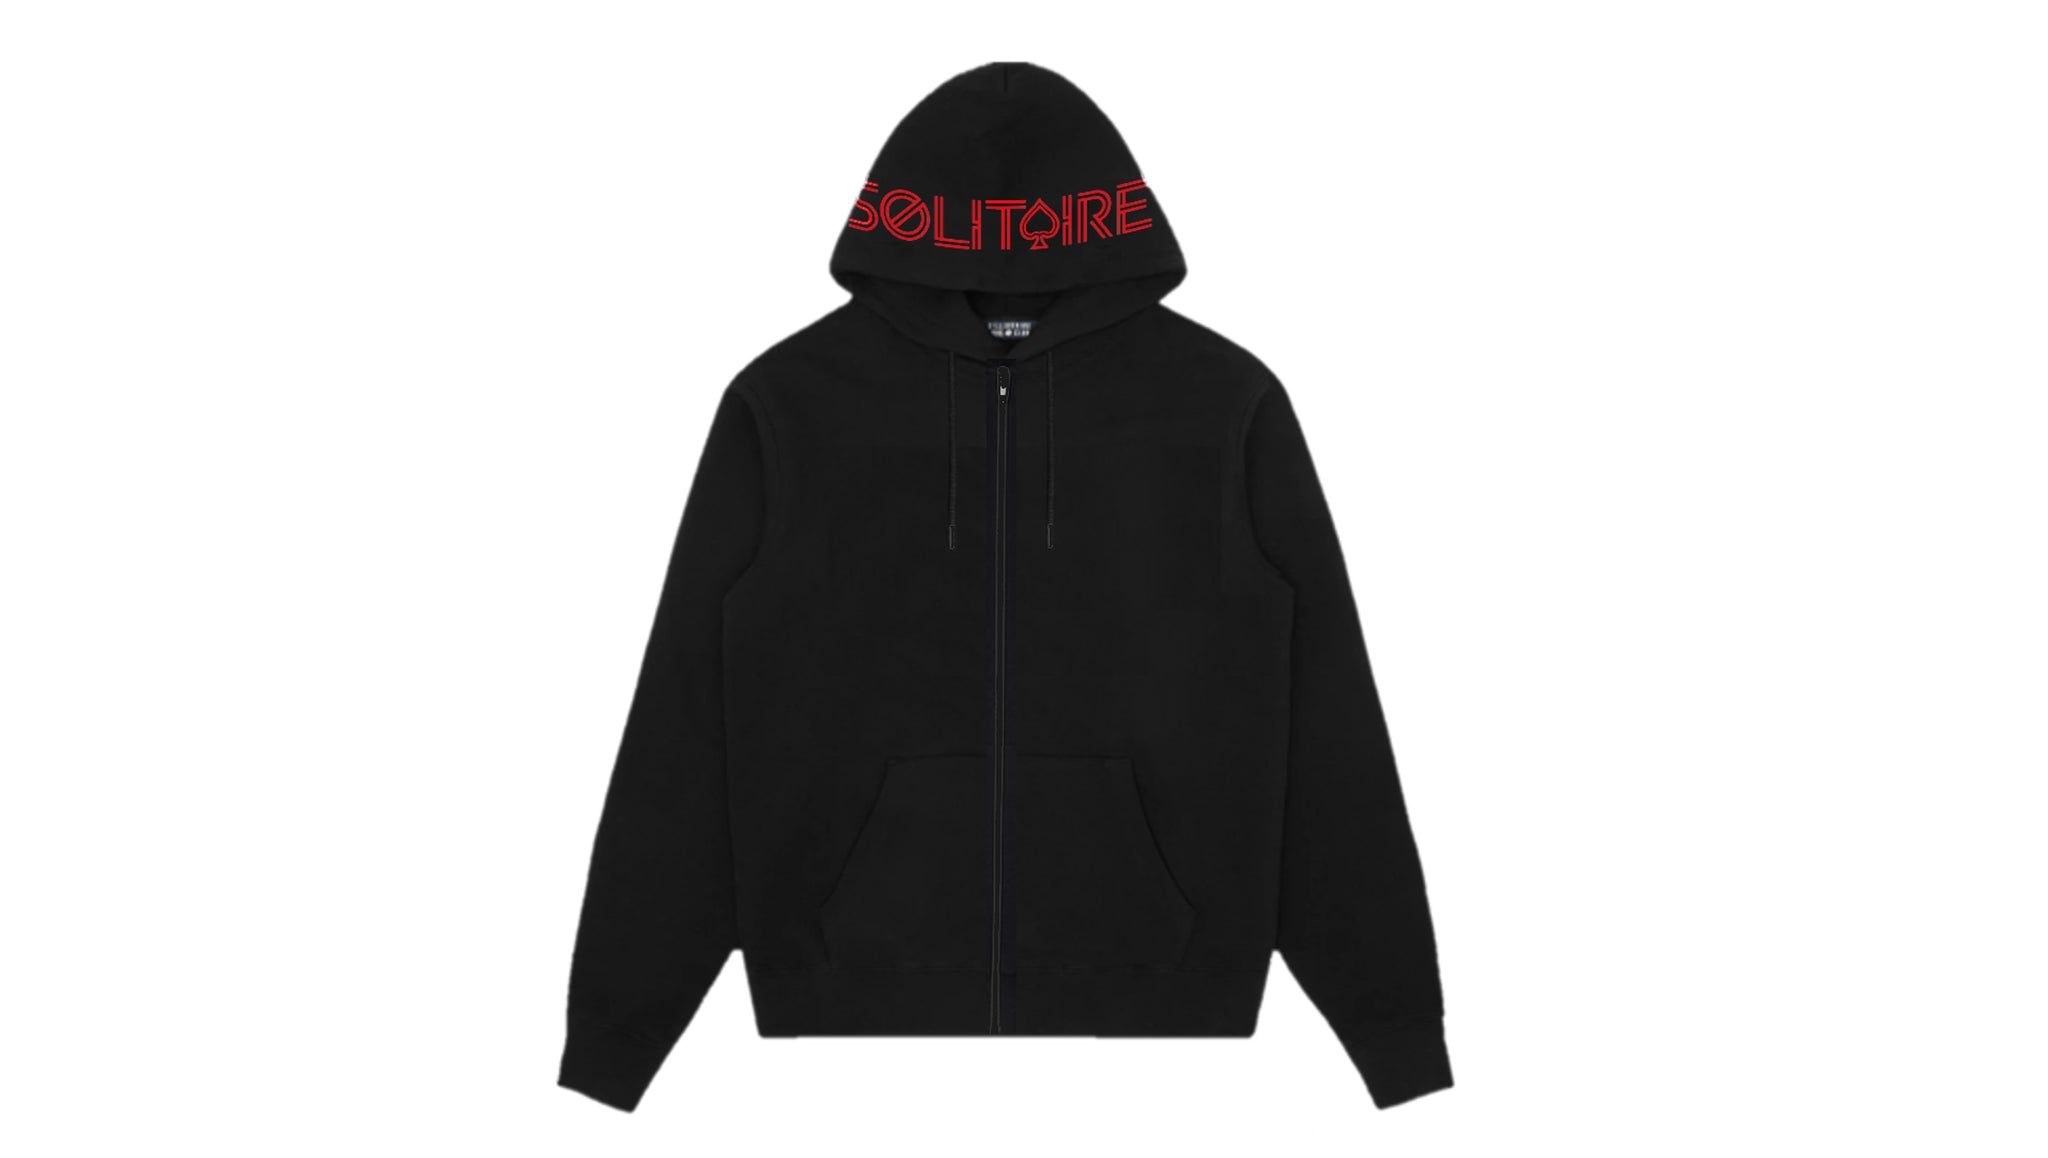 Solitaire Zipped Hoodie (Red)